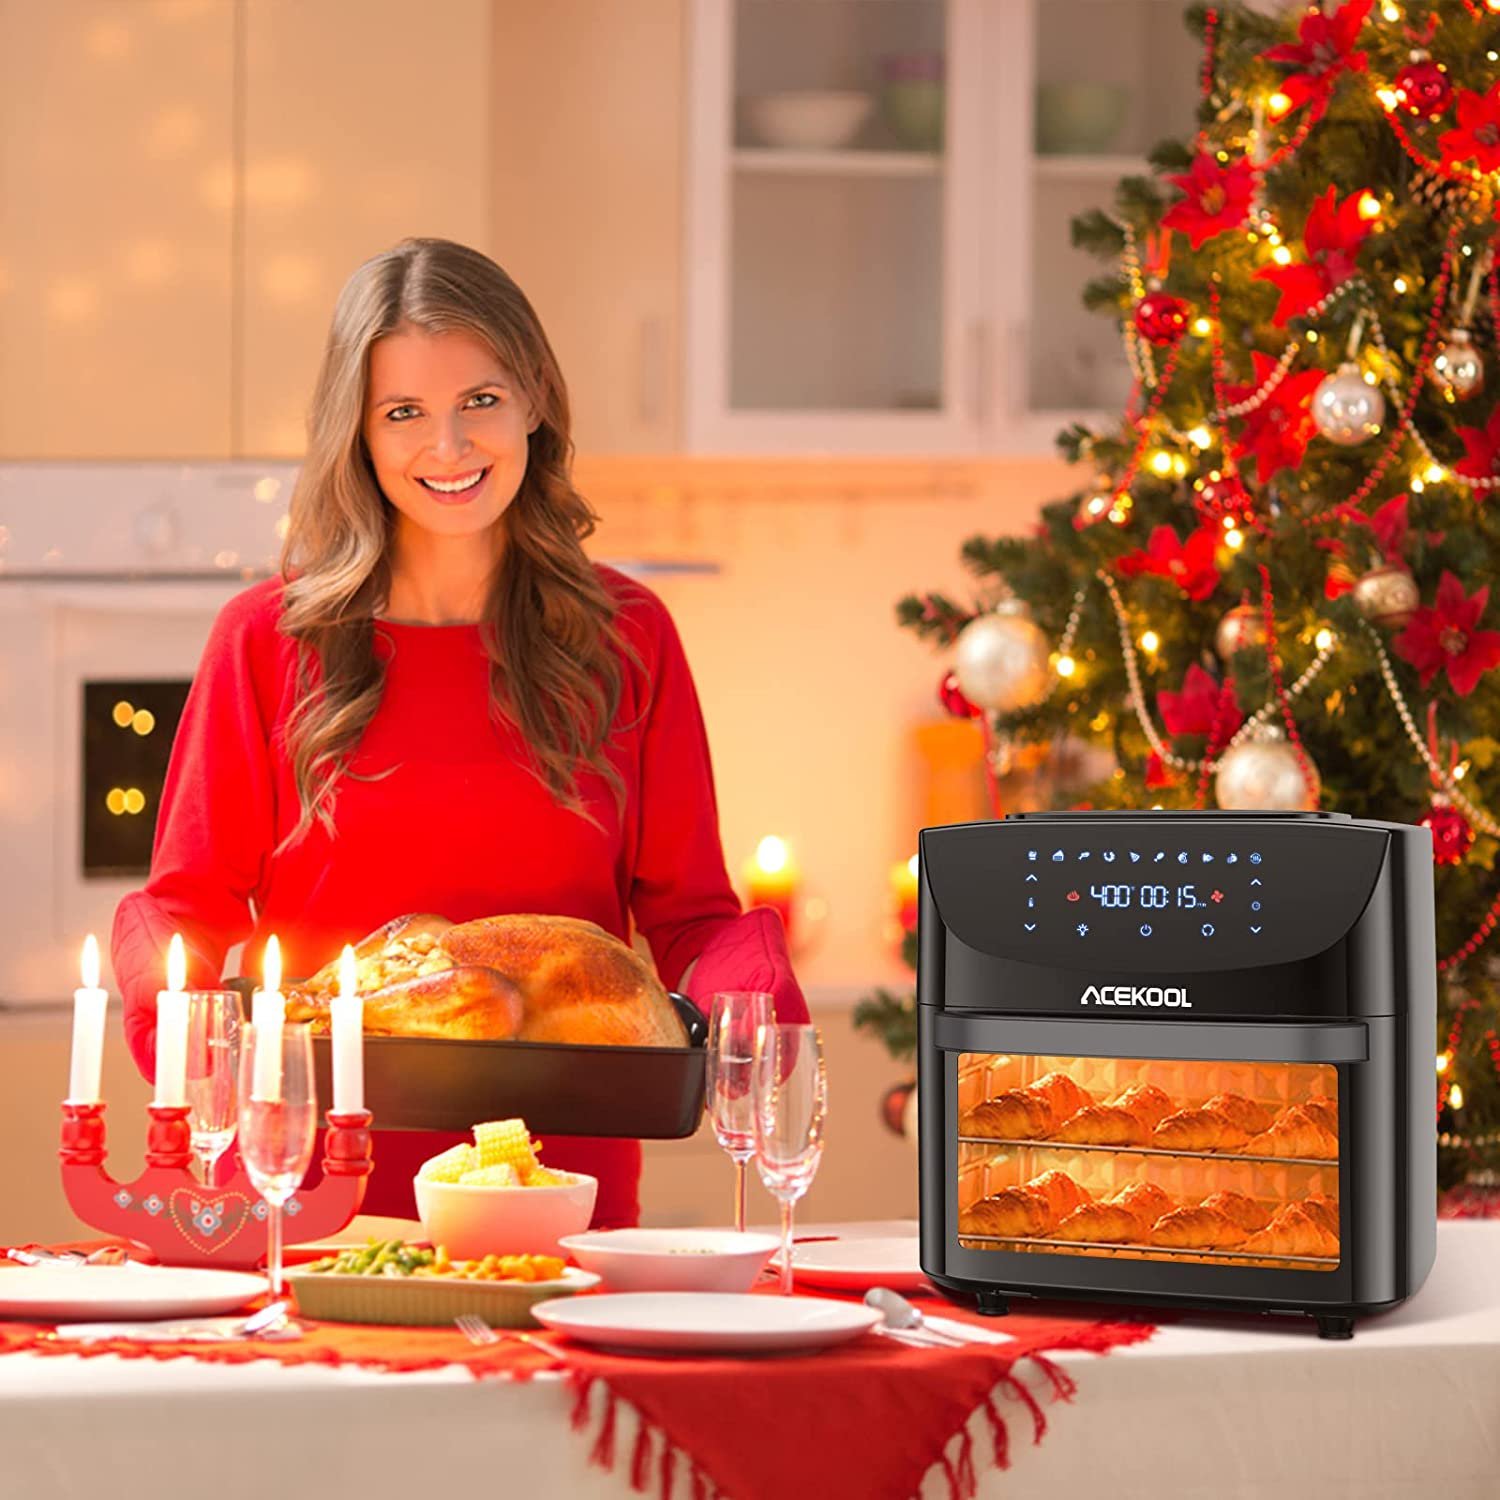 https://themarketdepot.com/wp-content/uploads/2023/01/2022-NEW-Air-Fryer-Toaster-Oven-Large-10-in-1-Digital-Convection-Oven-Air-Fryer-Oven-Combo-2.jpeg